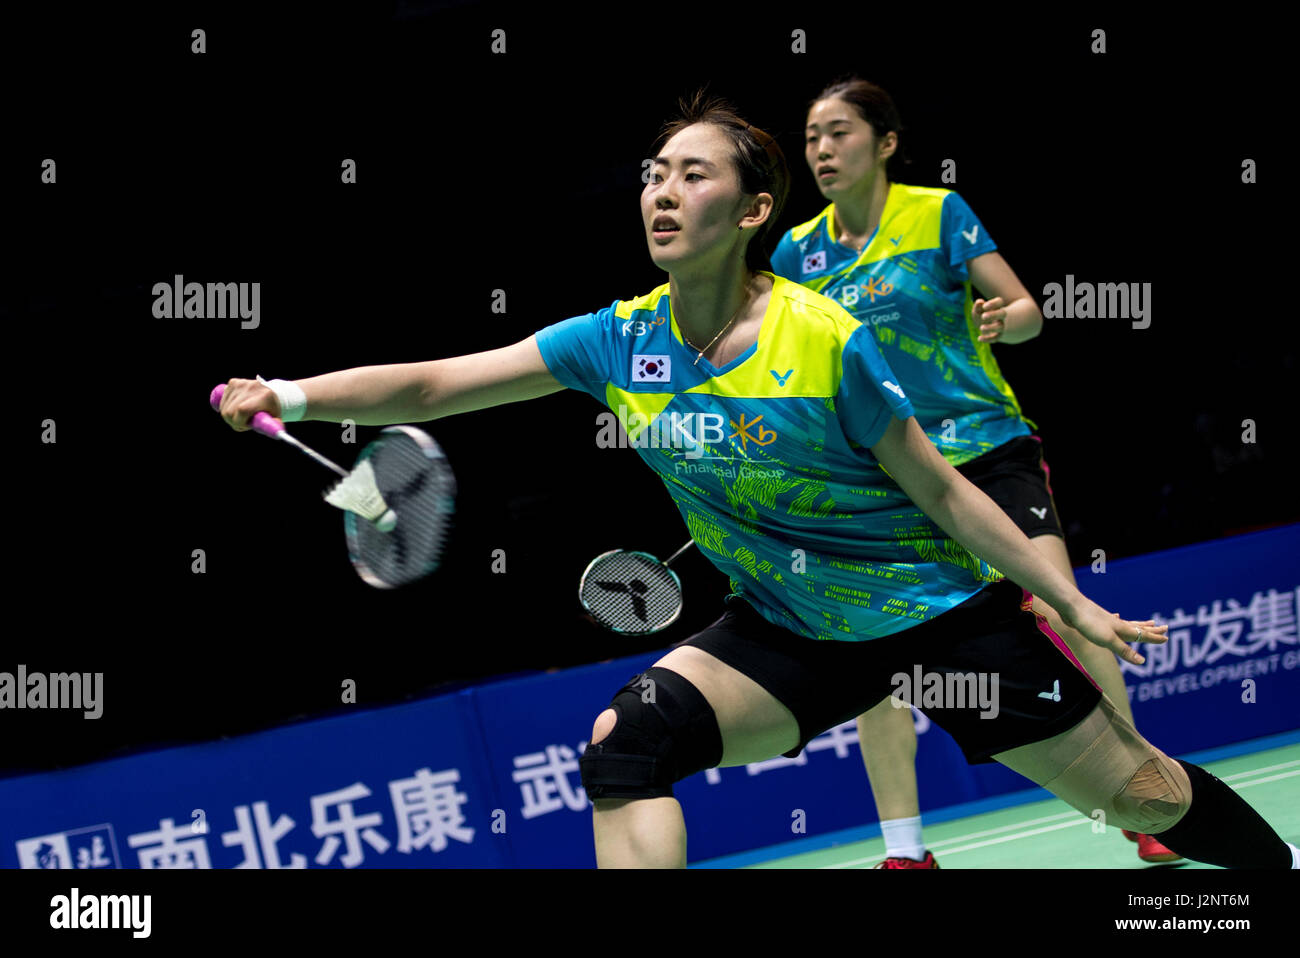 Wuhan, China's Hubei Province. 30th Apr, 2017. Kim Hye Rin and Yoo Hae Won  (Front) of South Korea compete during the women's doubles final match  against Matsutomo Misaki and Takahashi Ayaka of